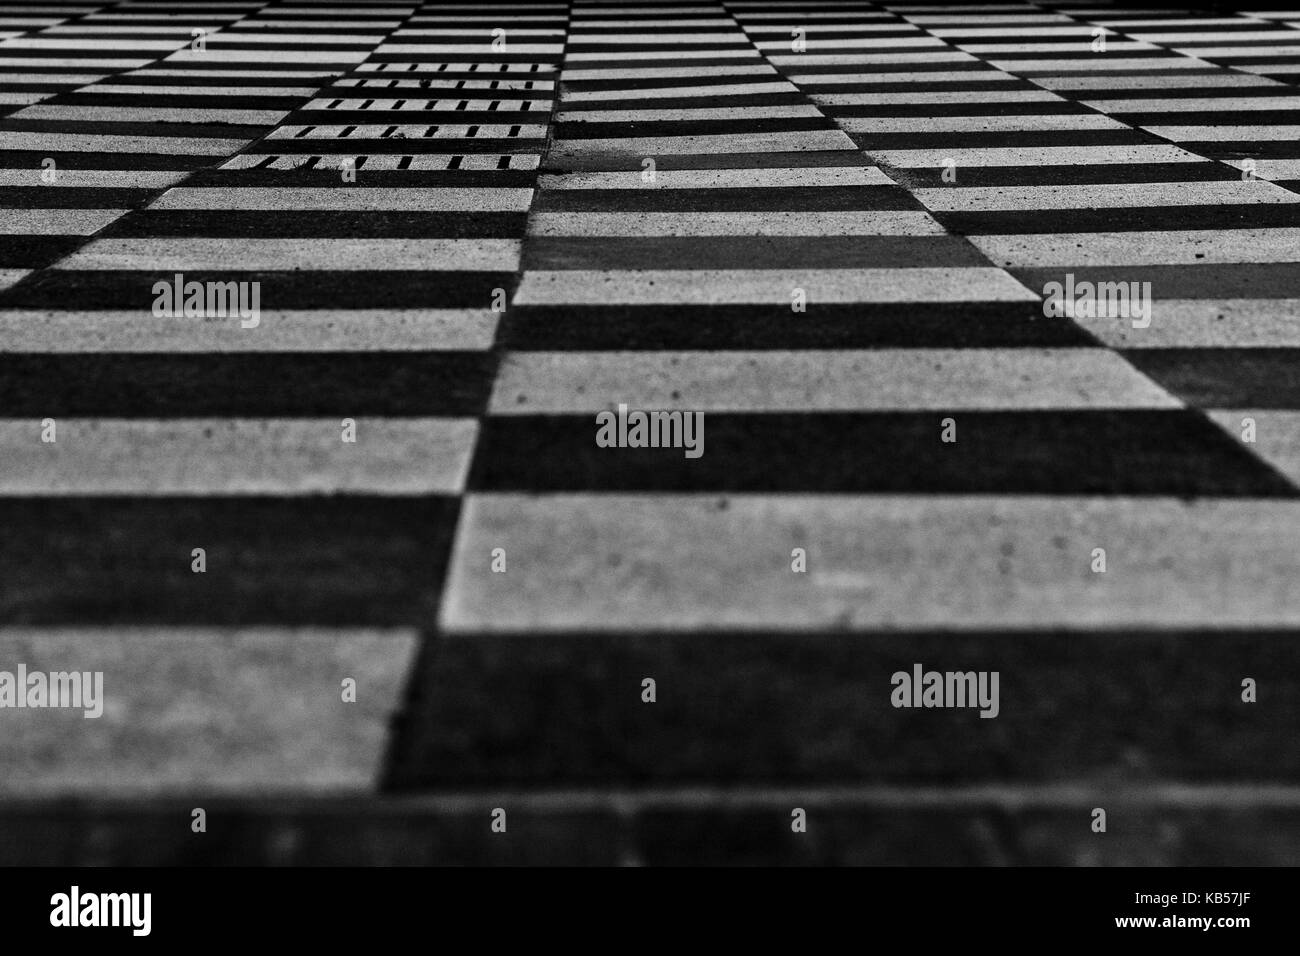 Patterned floor, close-up Stock Photo